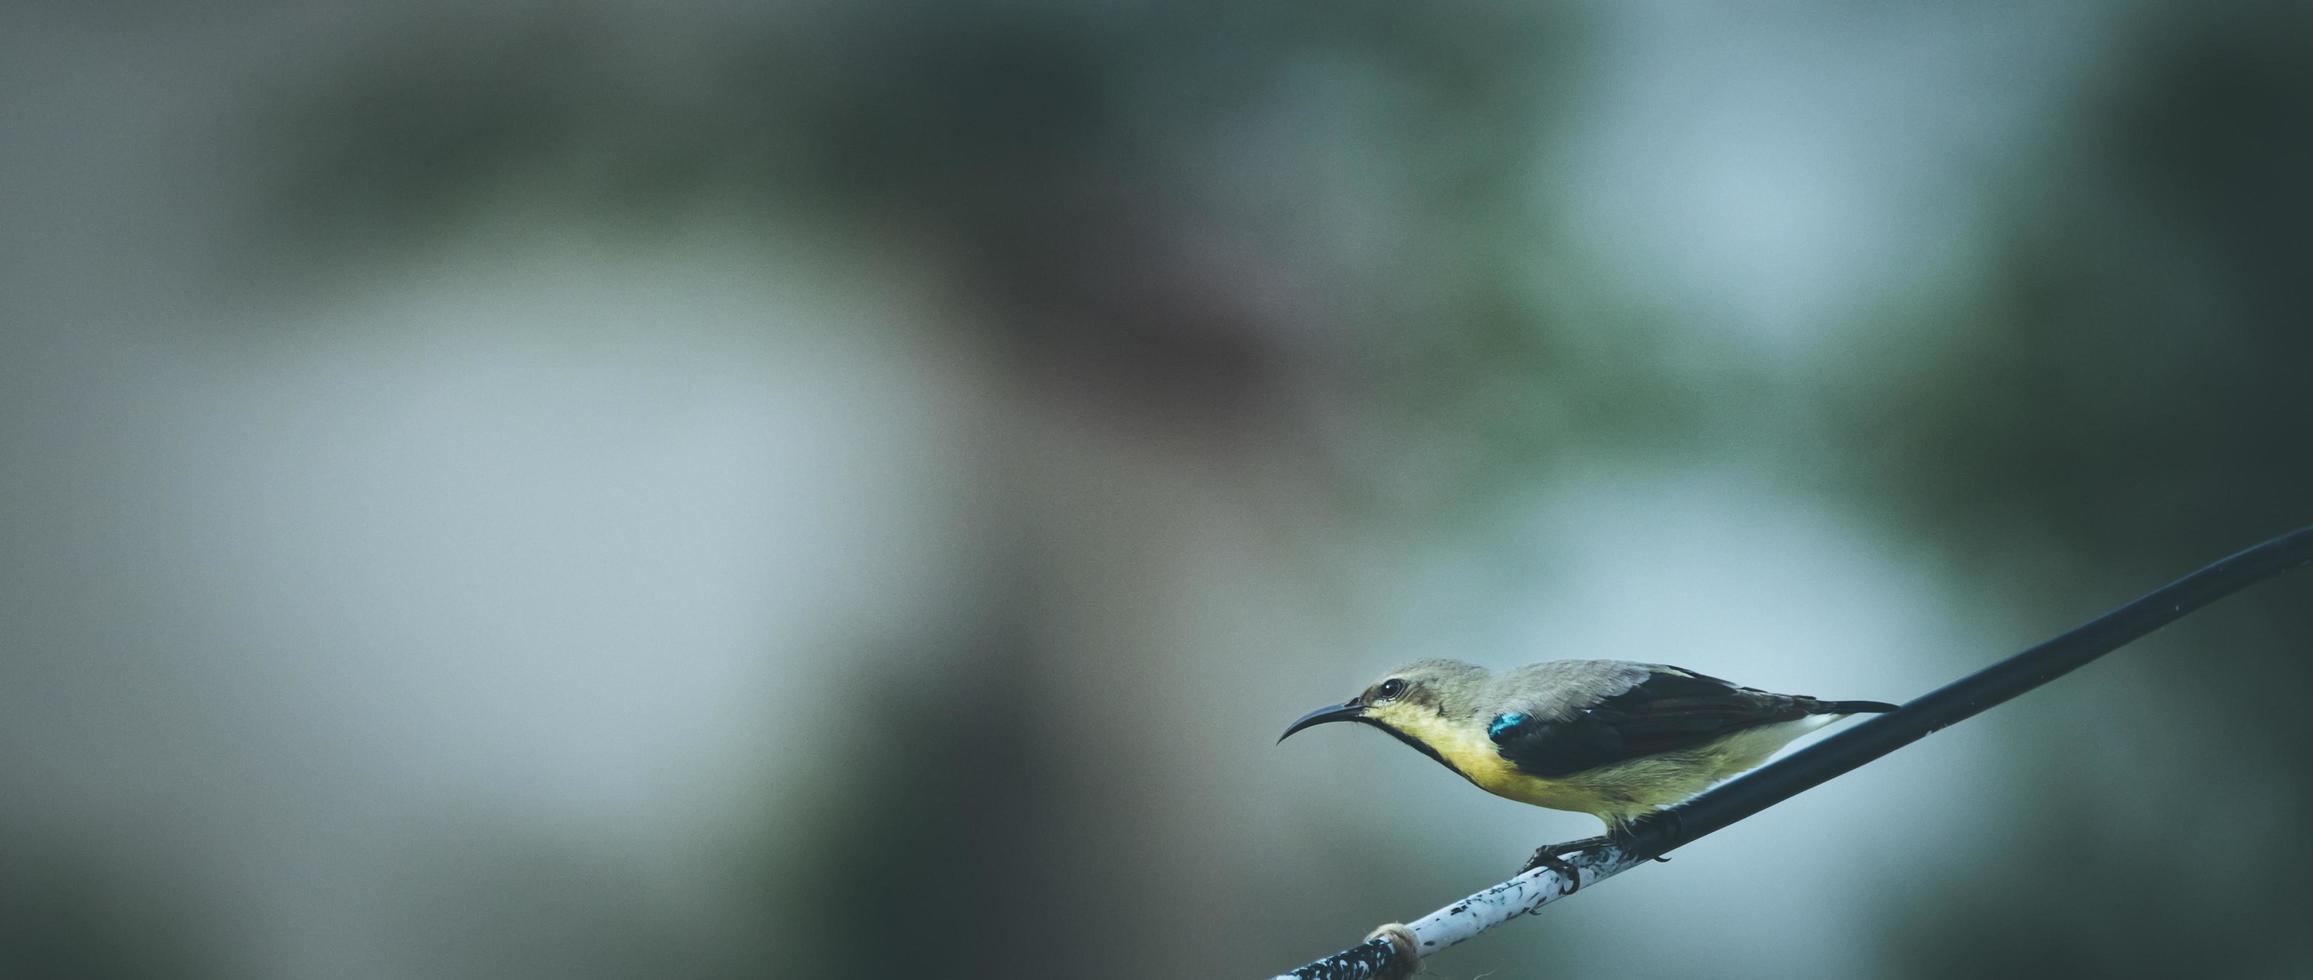 Yellow and black bird on a tree branch photo